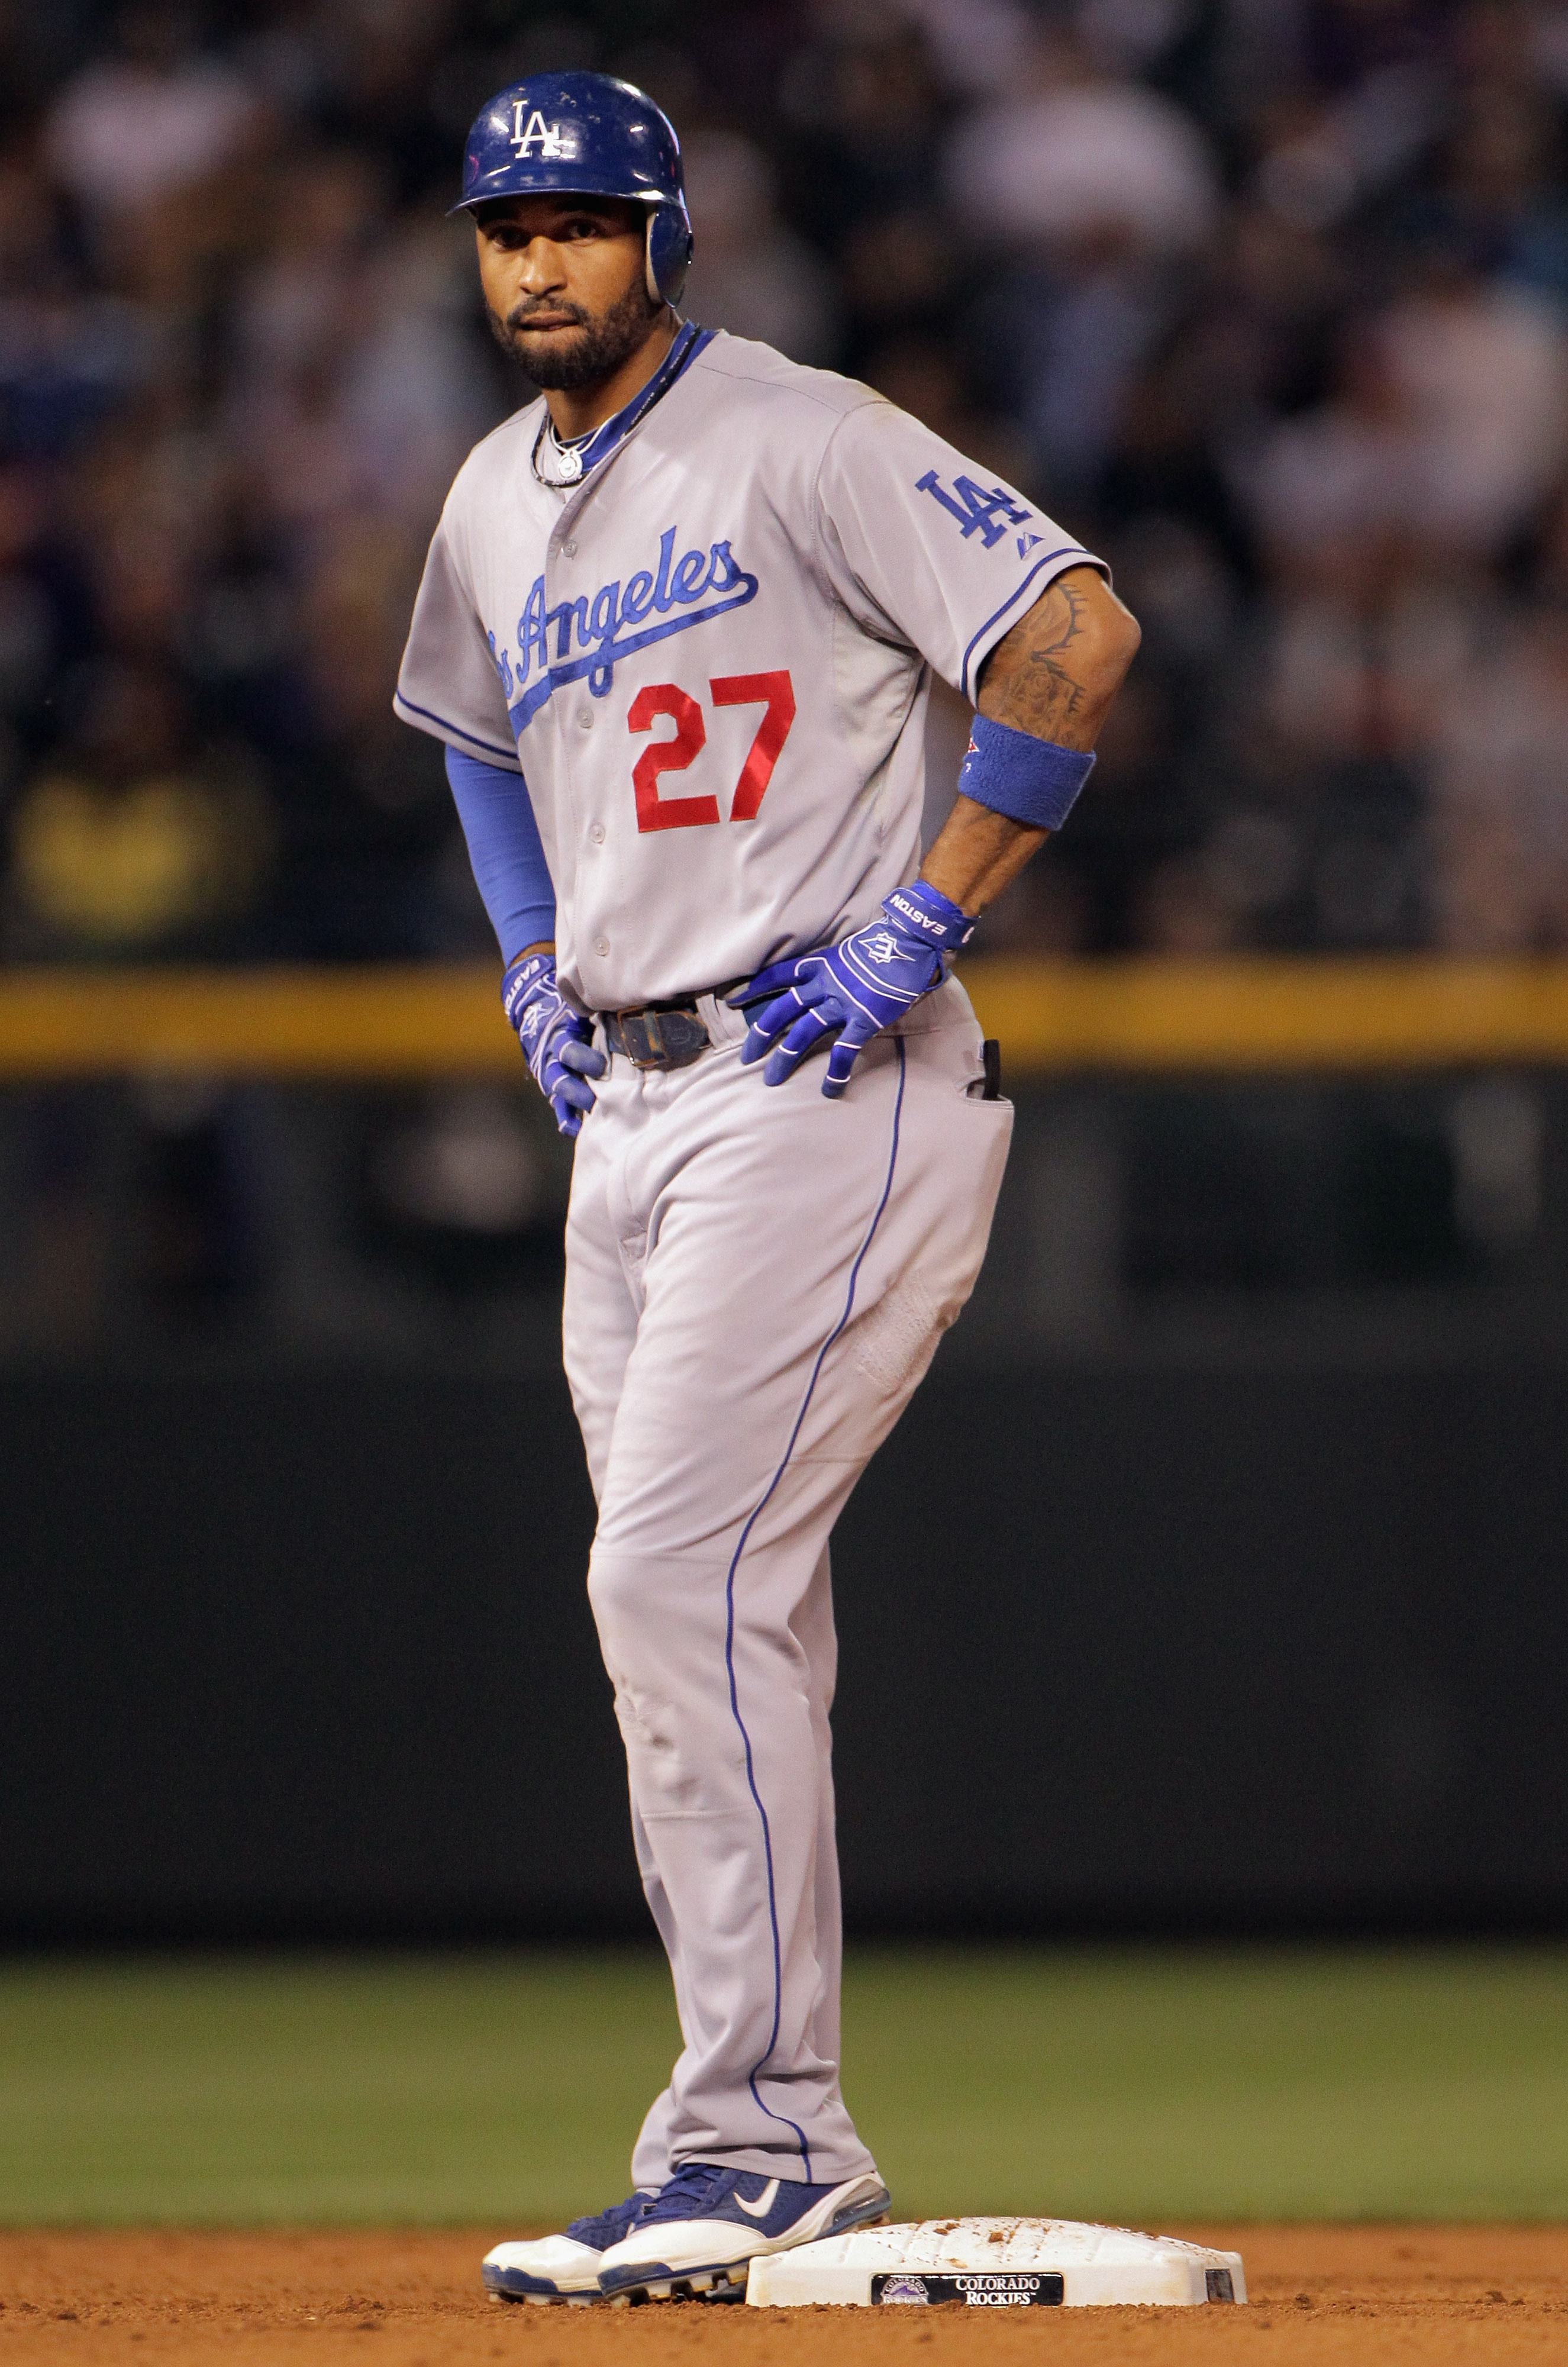 DENVER, CO - JUNE 09:  Matt Kemp #27 of the Los Angeles Dodgers looks on from second base after he doubled against the Colorado Rockies in the seventh inning at Coors Field on June 9, 2011 in Denver, Colorado.  (Photo by Doug Pensinger/Getty Images)